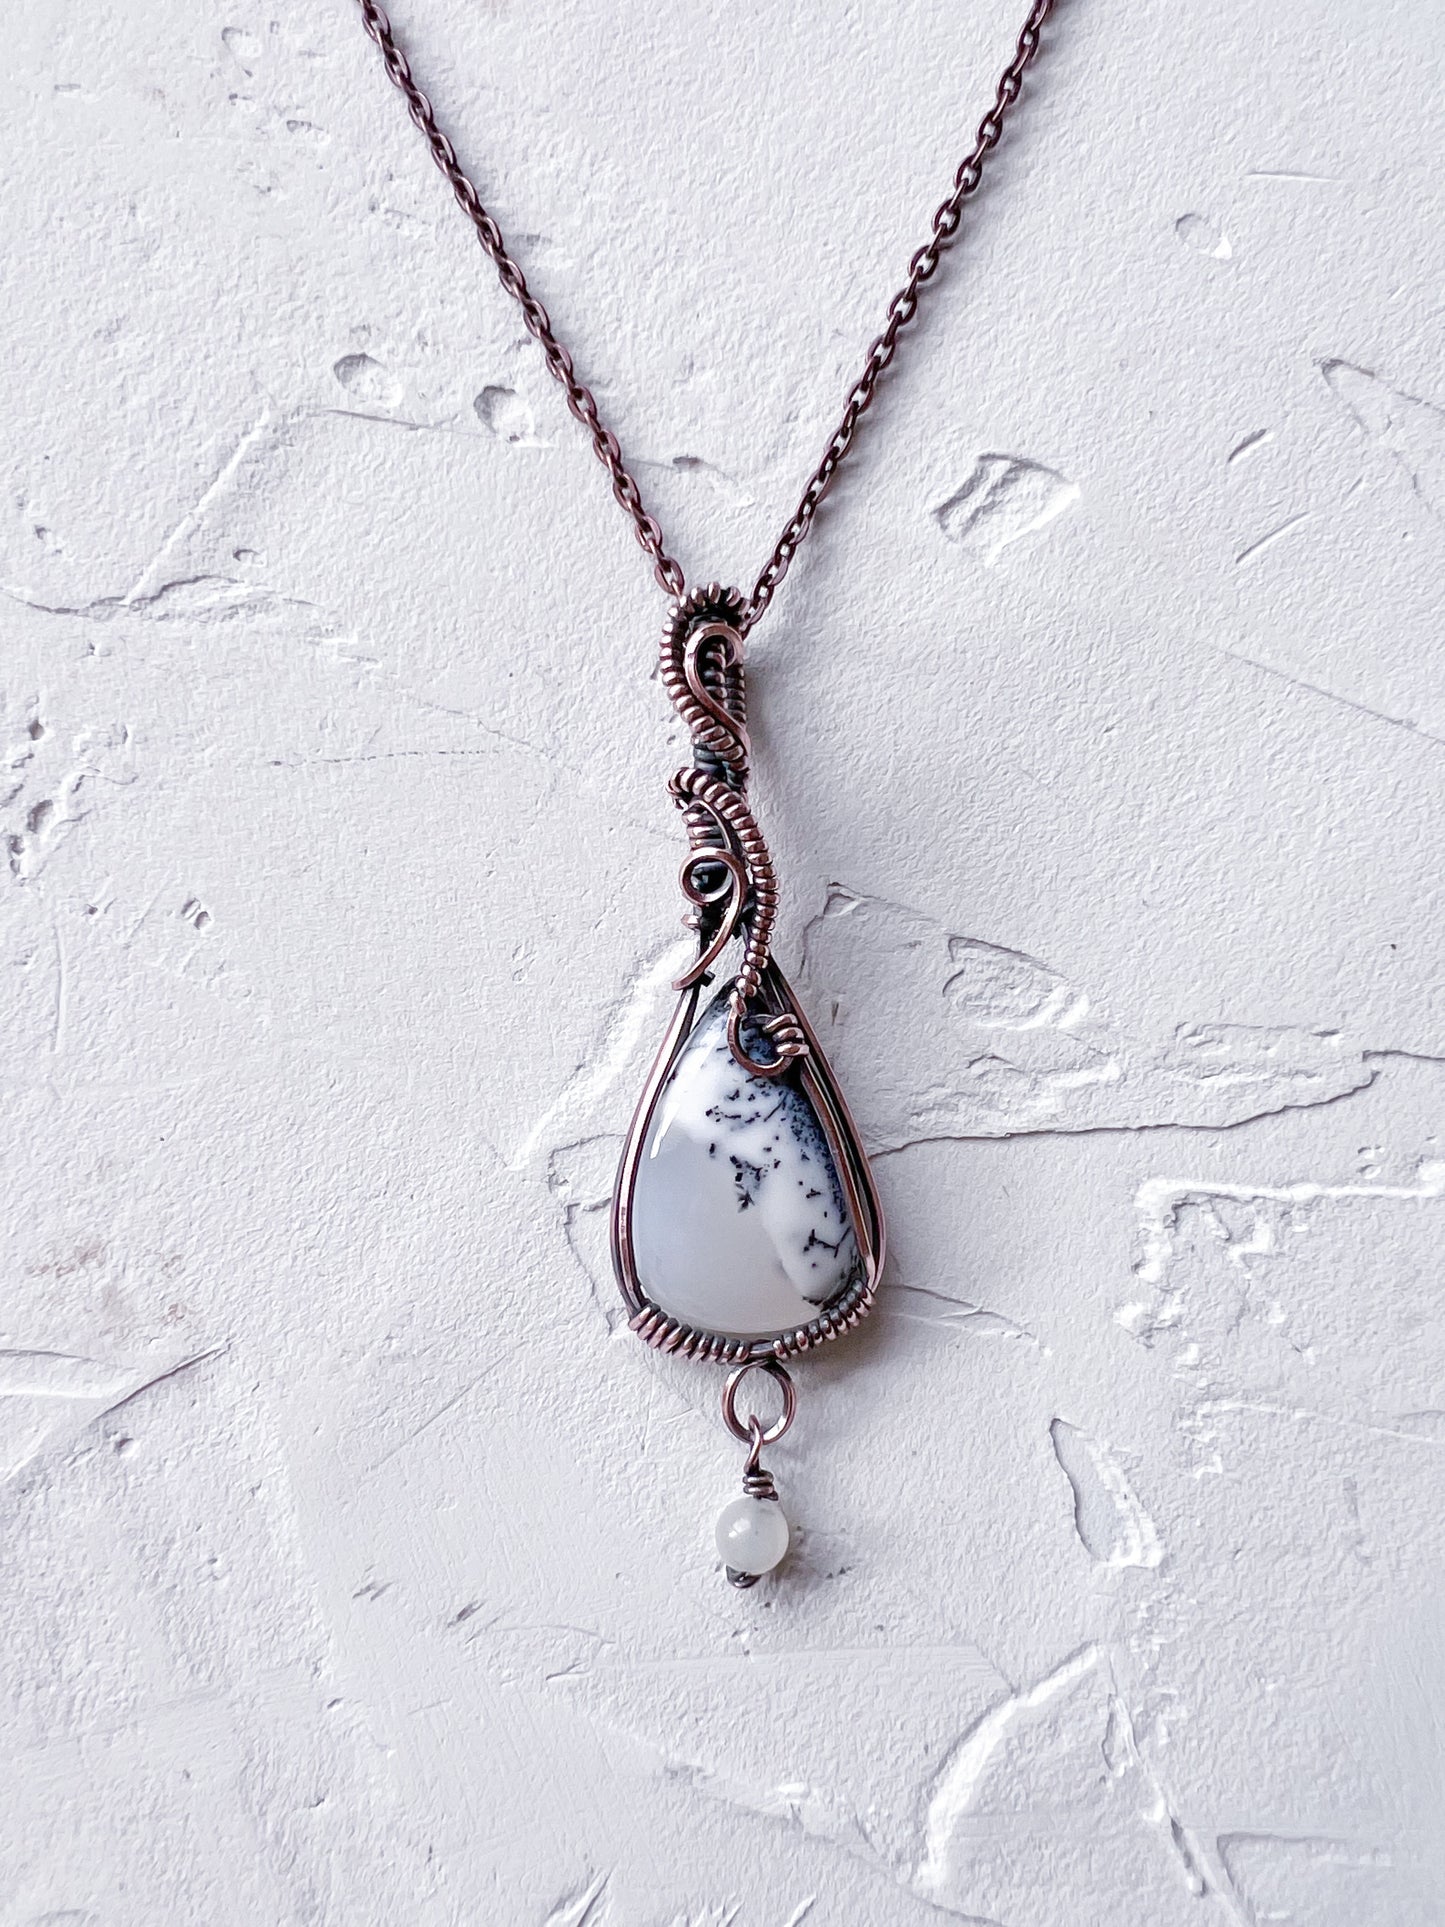 Copper and Merlinite Pendant with Moonstone accent